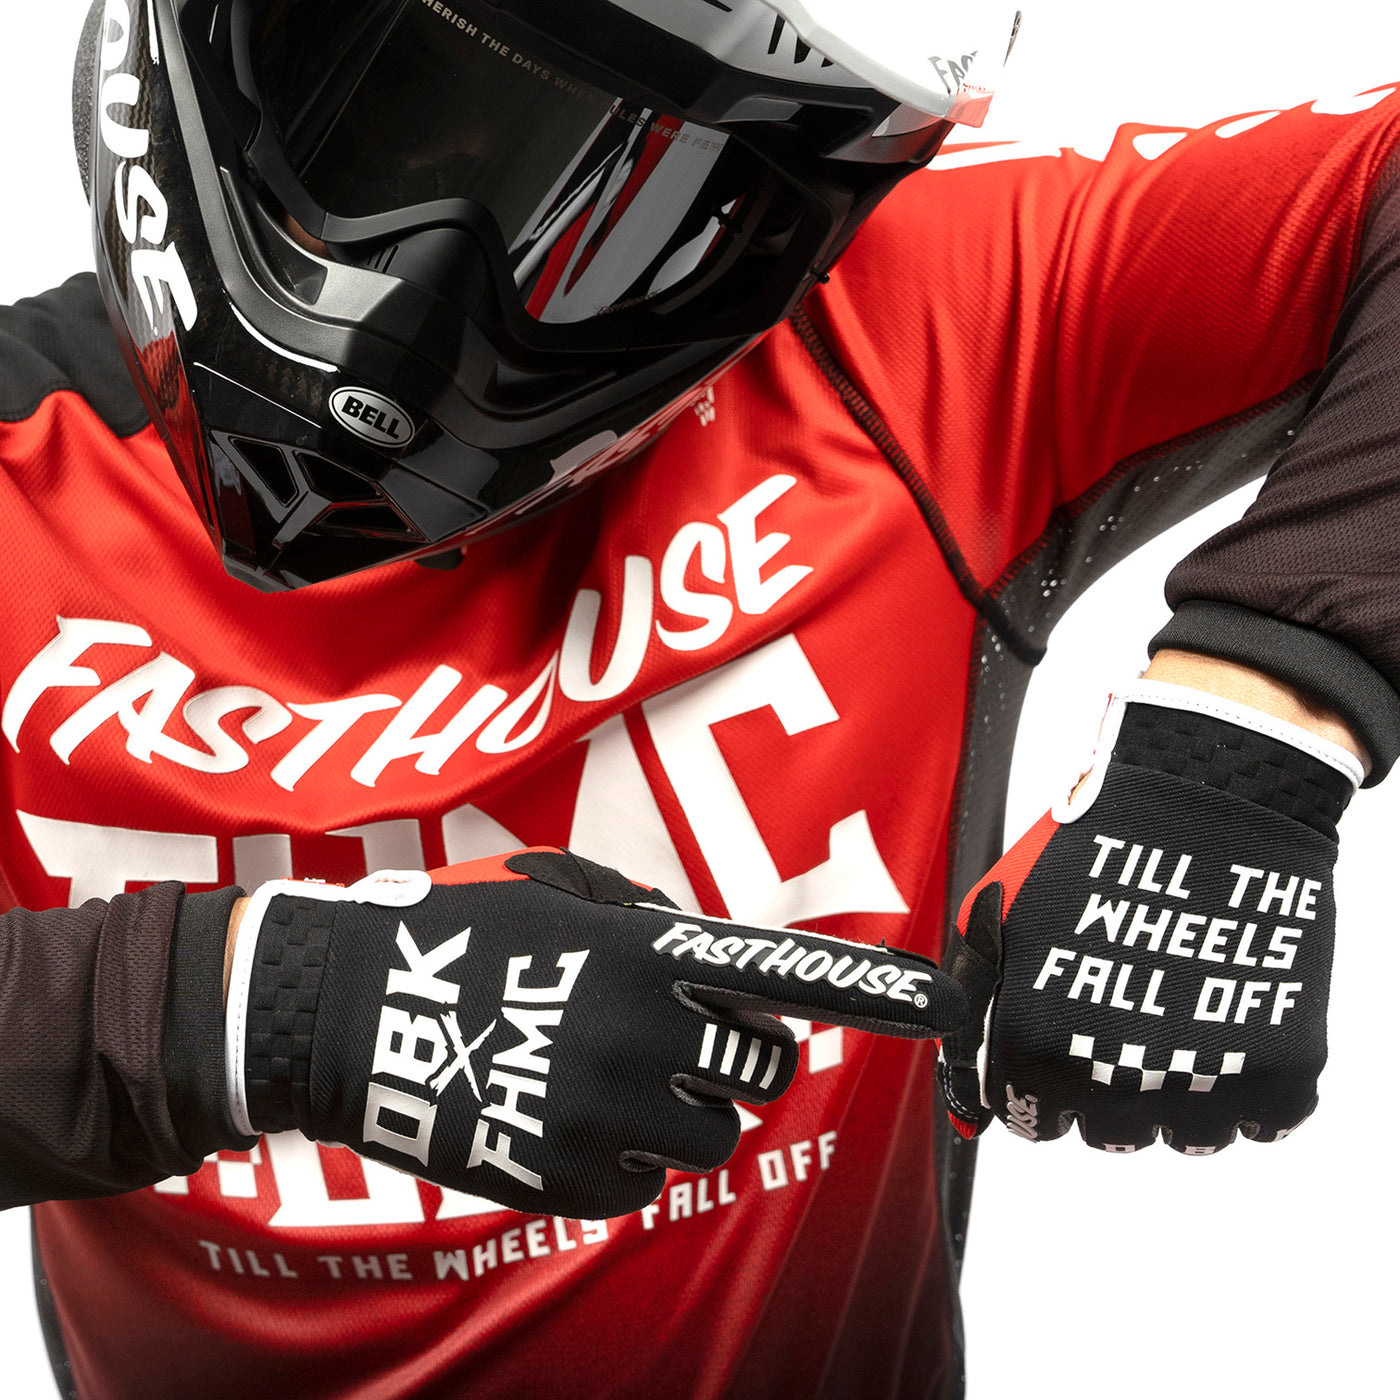 Fasthouse Speed Style Twitch Glove